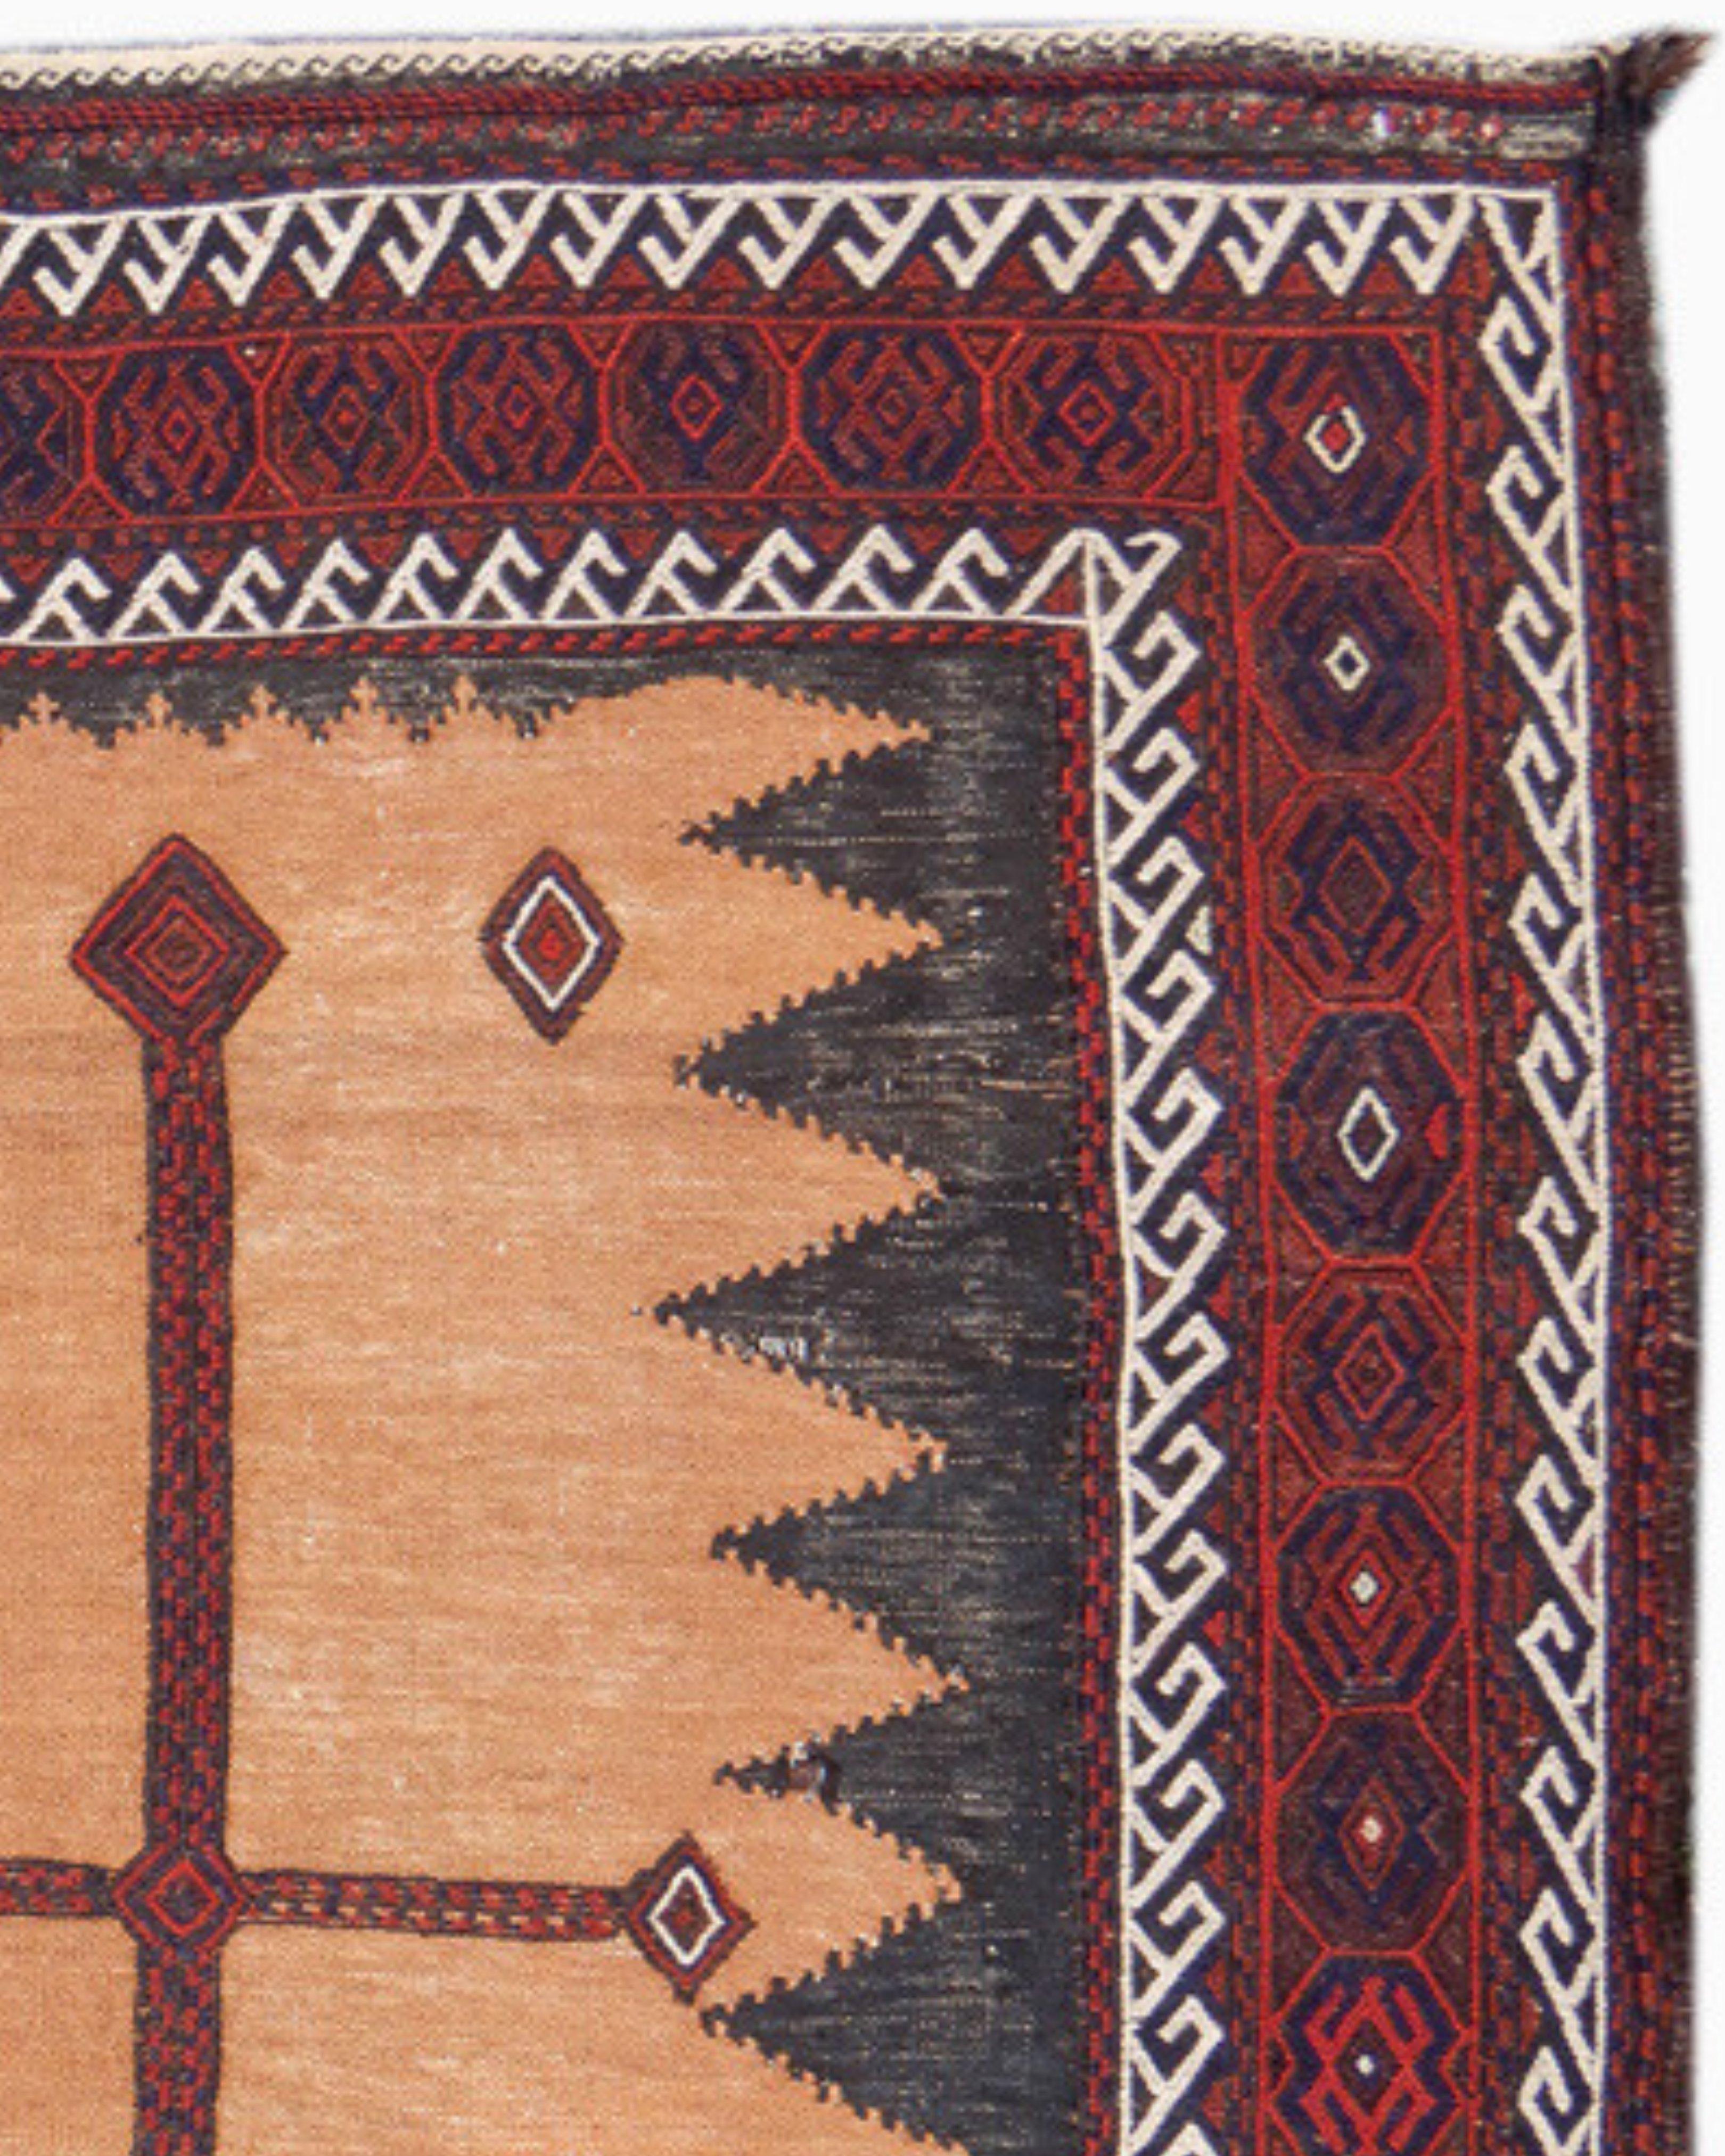 Classic Camel Ground Baluch Soffreh Rug, c. 1900

This classic camel ground ‘soffreh,’ or presentation cloth, is the work of Baluch weavers from the Khorosan province in eastern Persia. The field is comprised of slit tapestry weave with a solitary